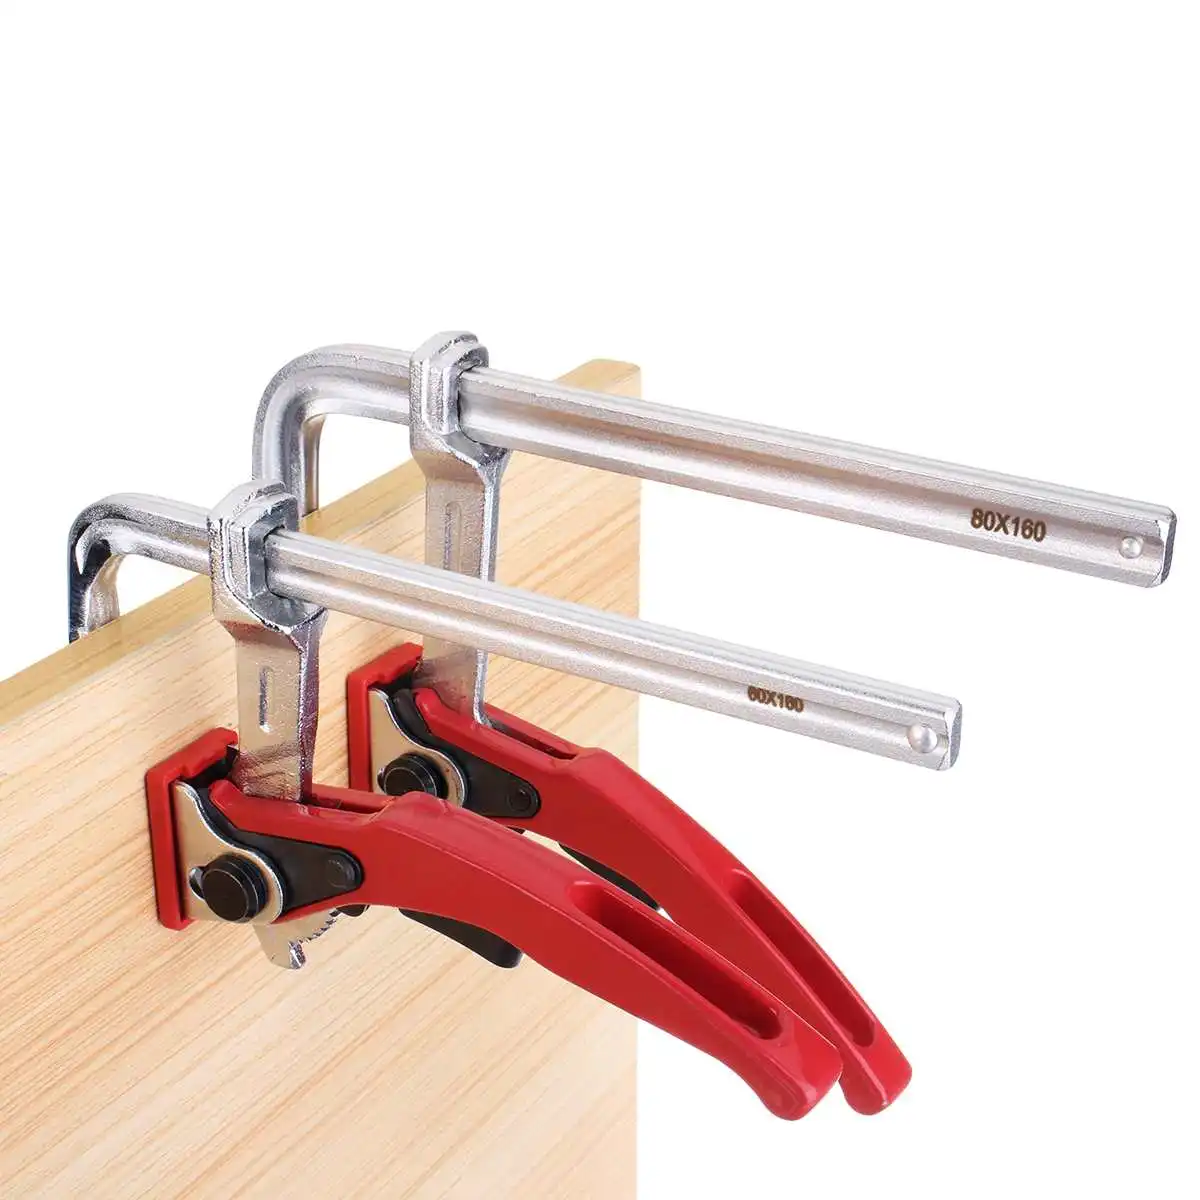 

MFT Clamp Heavy Duty Steel Ratchet F Clamp Bar Quick Release For MFT Guide Rail System Woodwork 300KG Clamping Pressure/In Stock